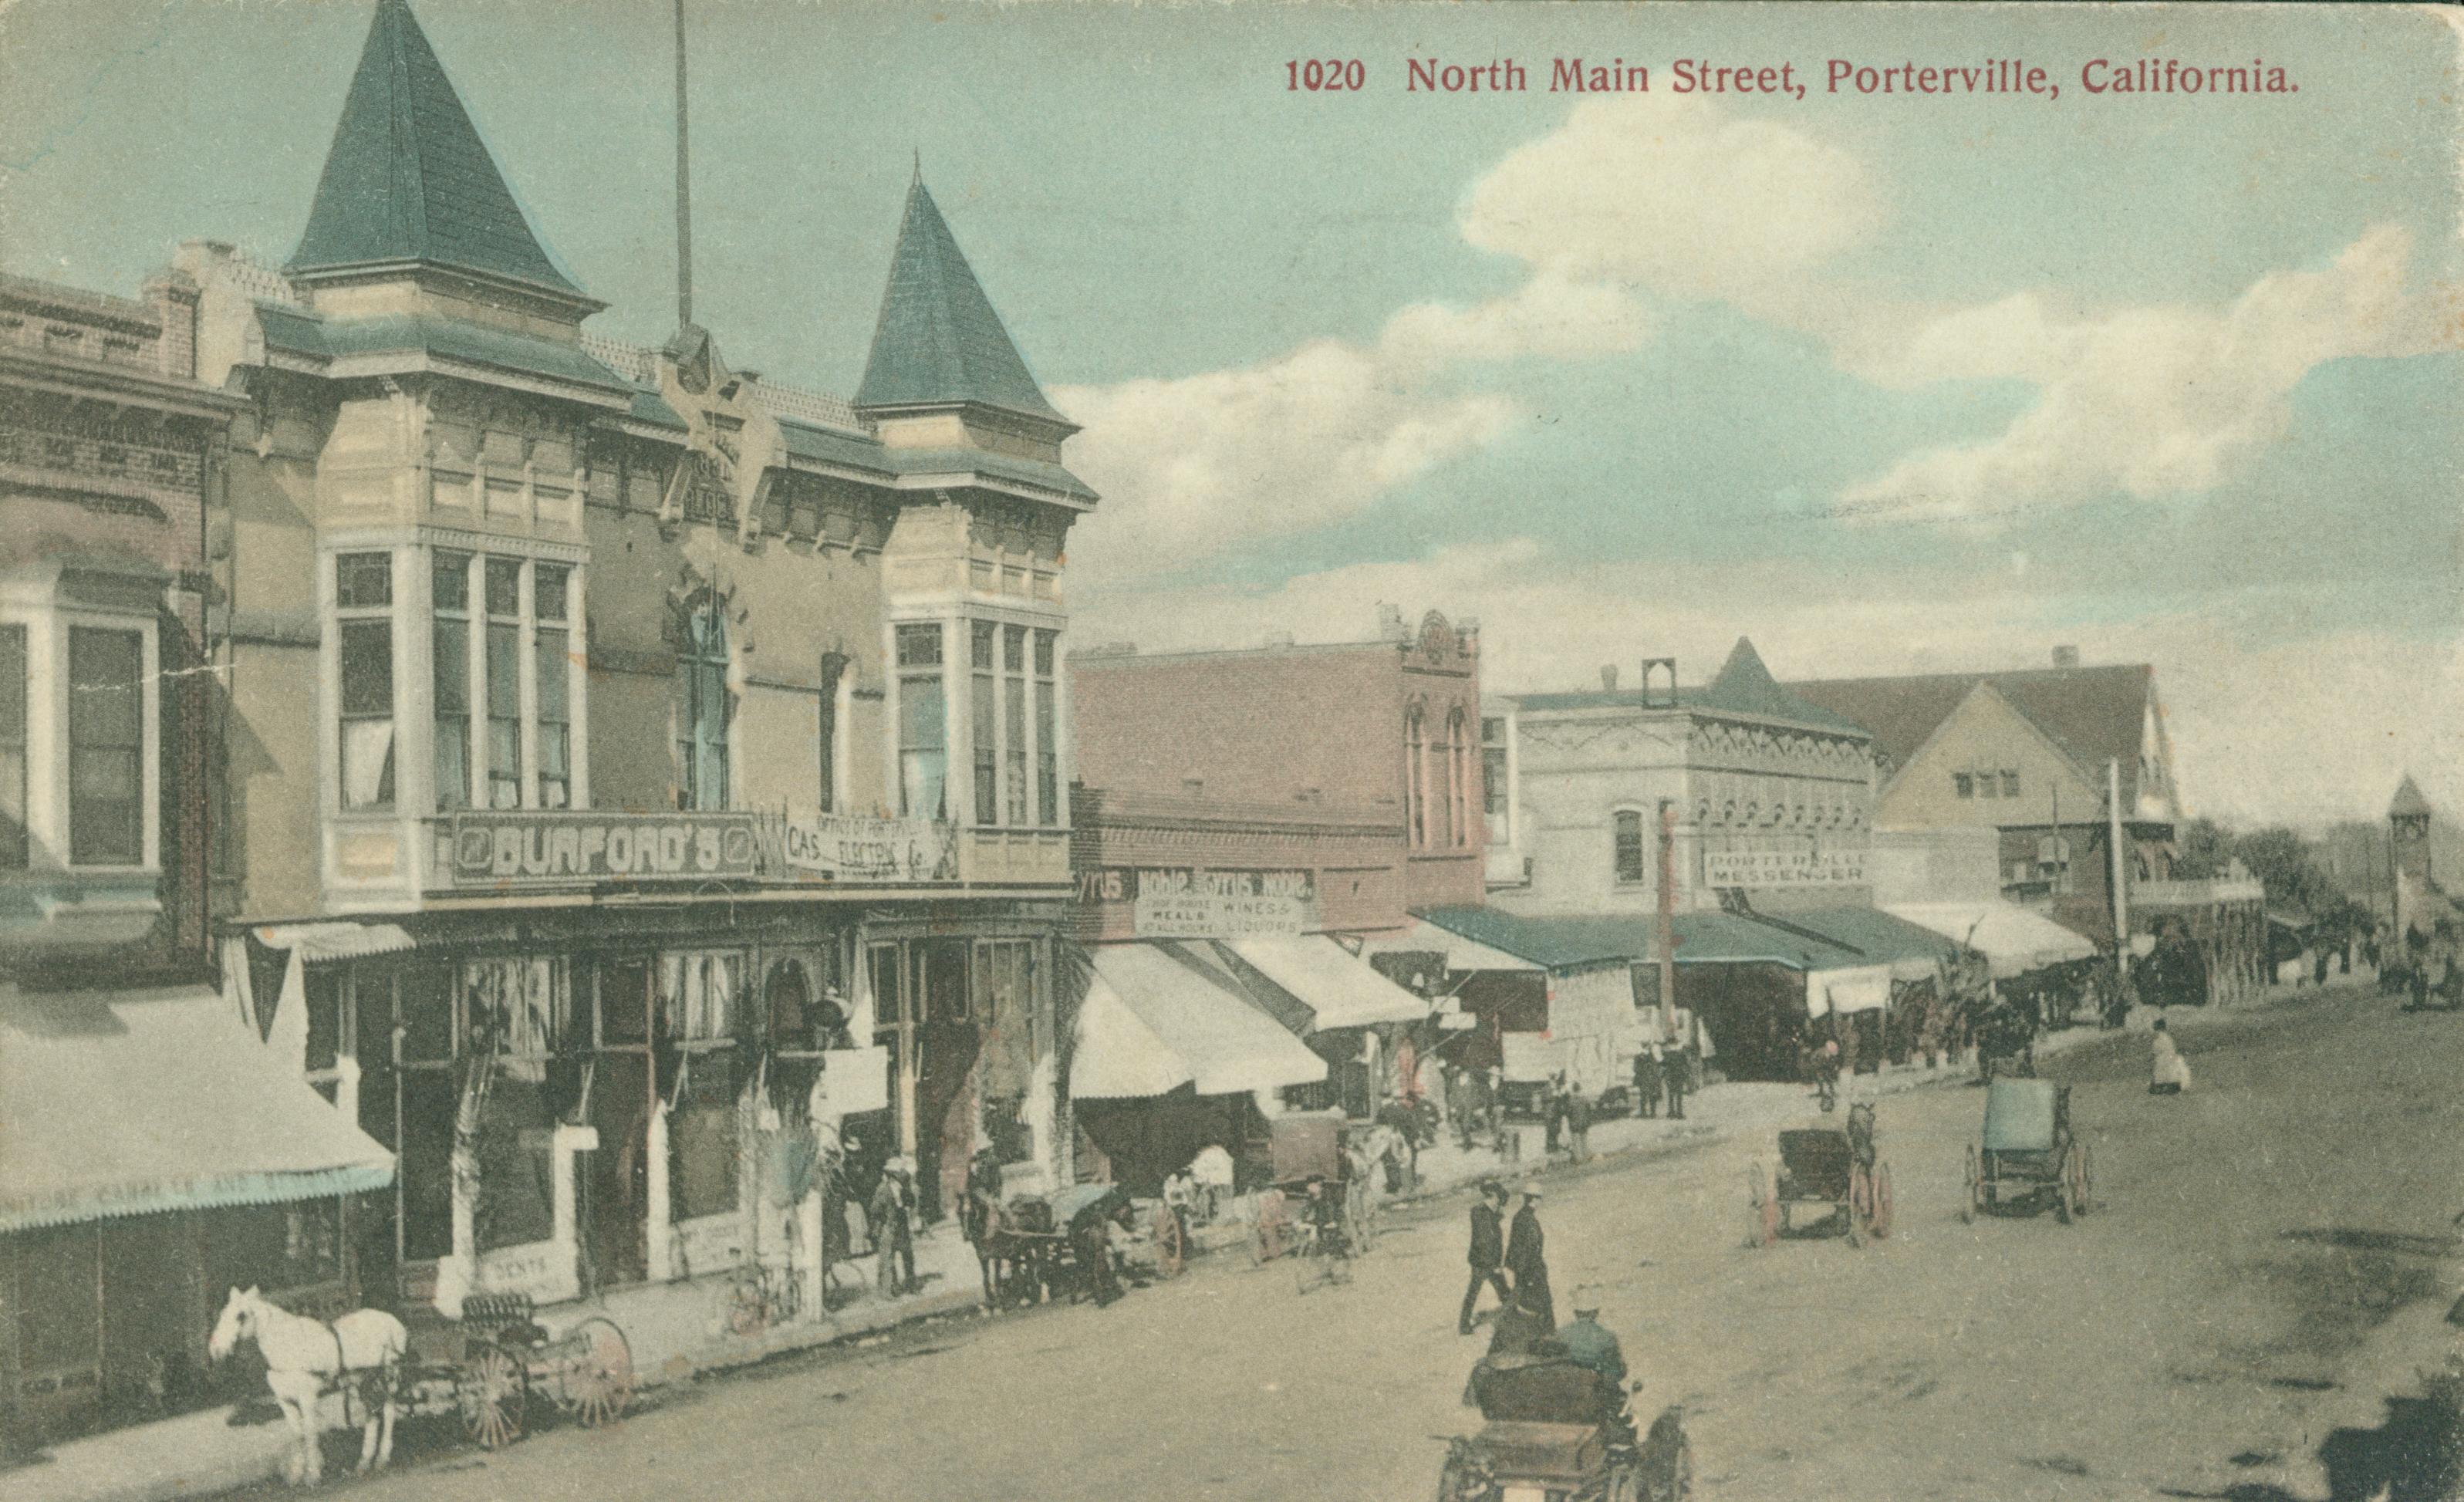 Shows Main Street in Porterville lined with buildings, with several cars and carriages in the road